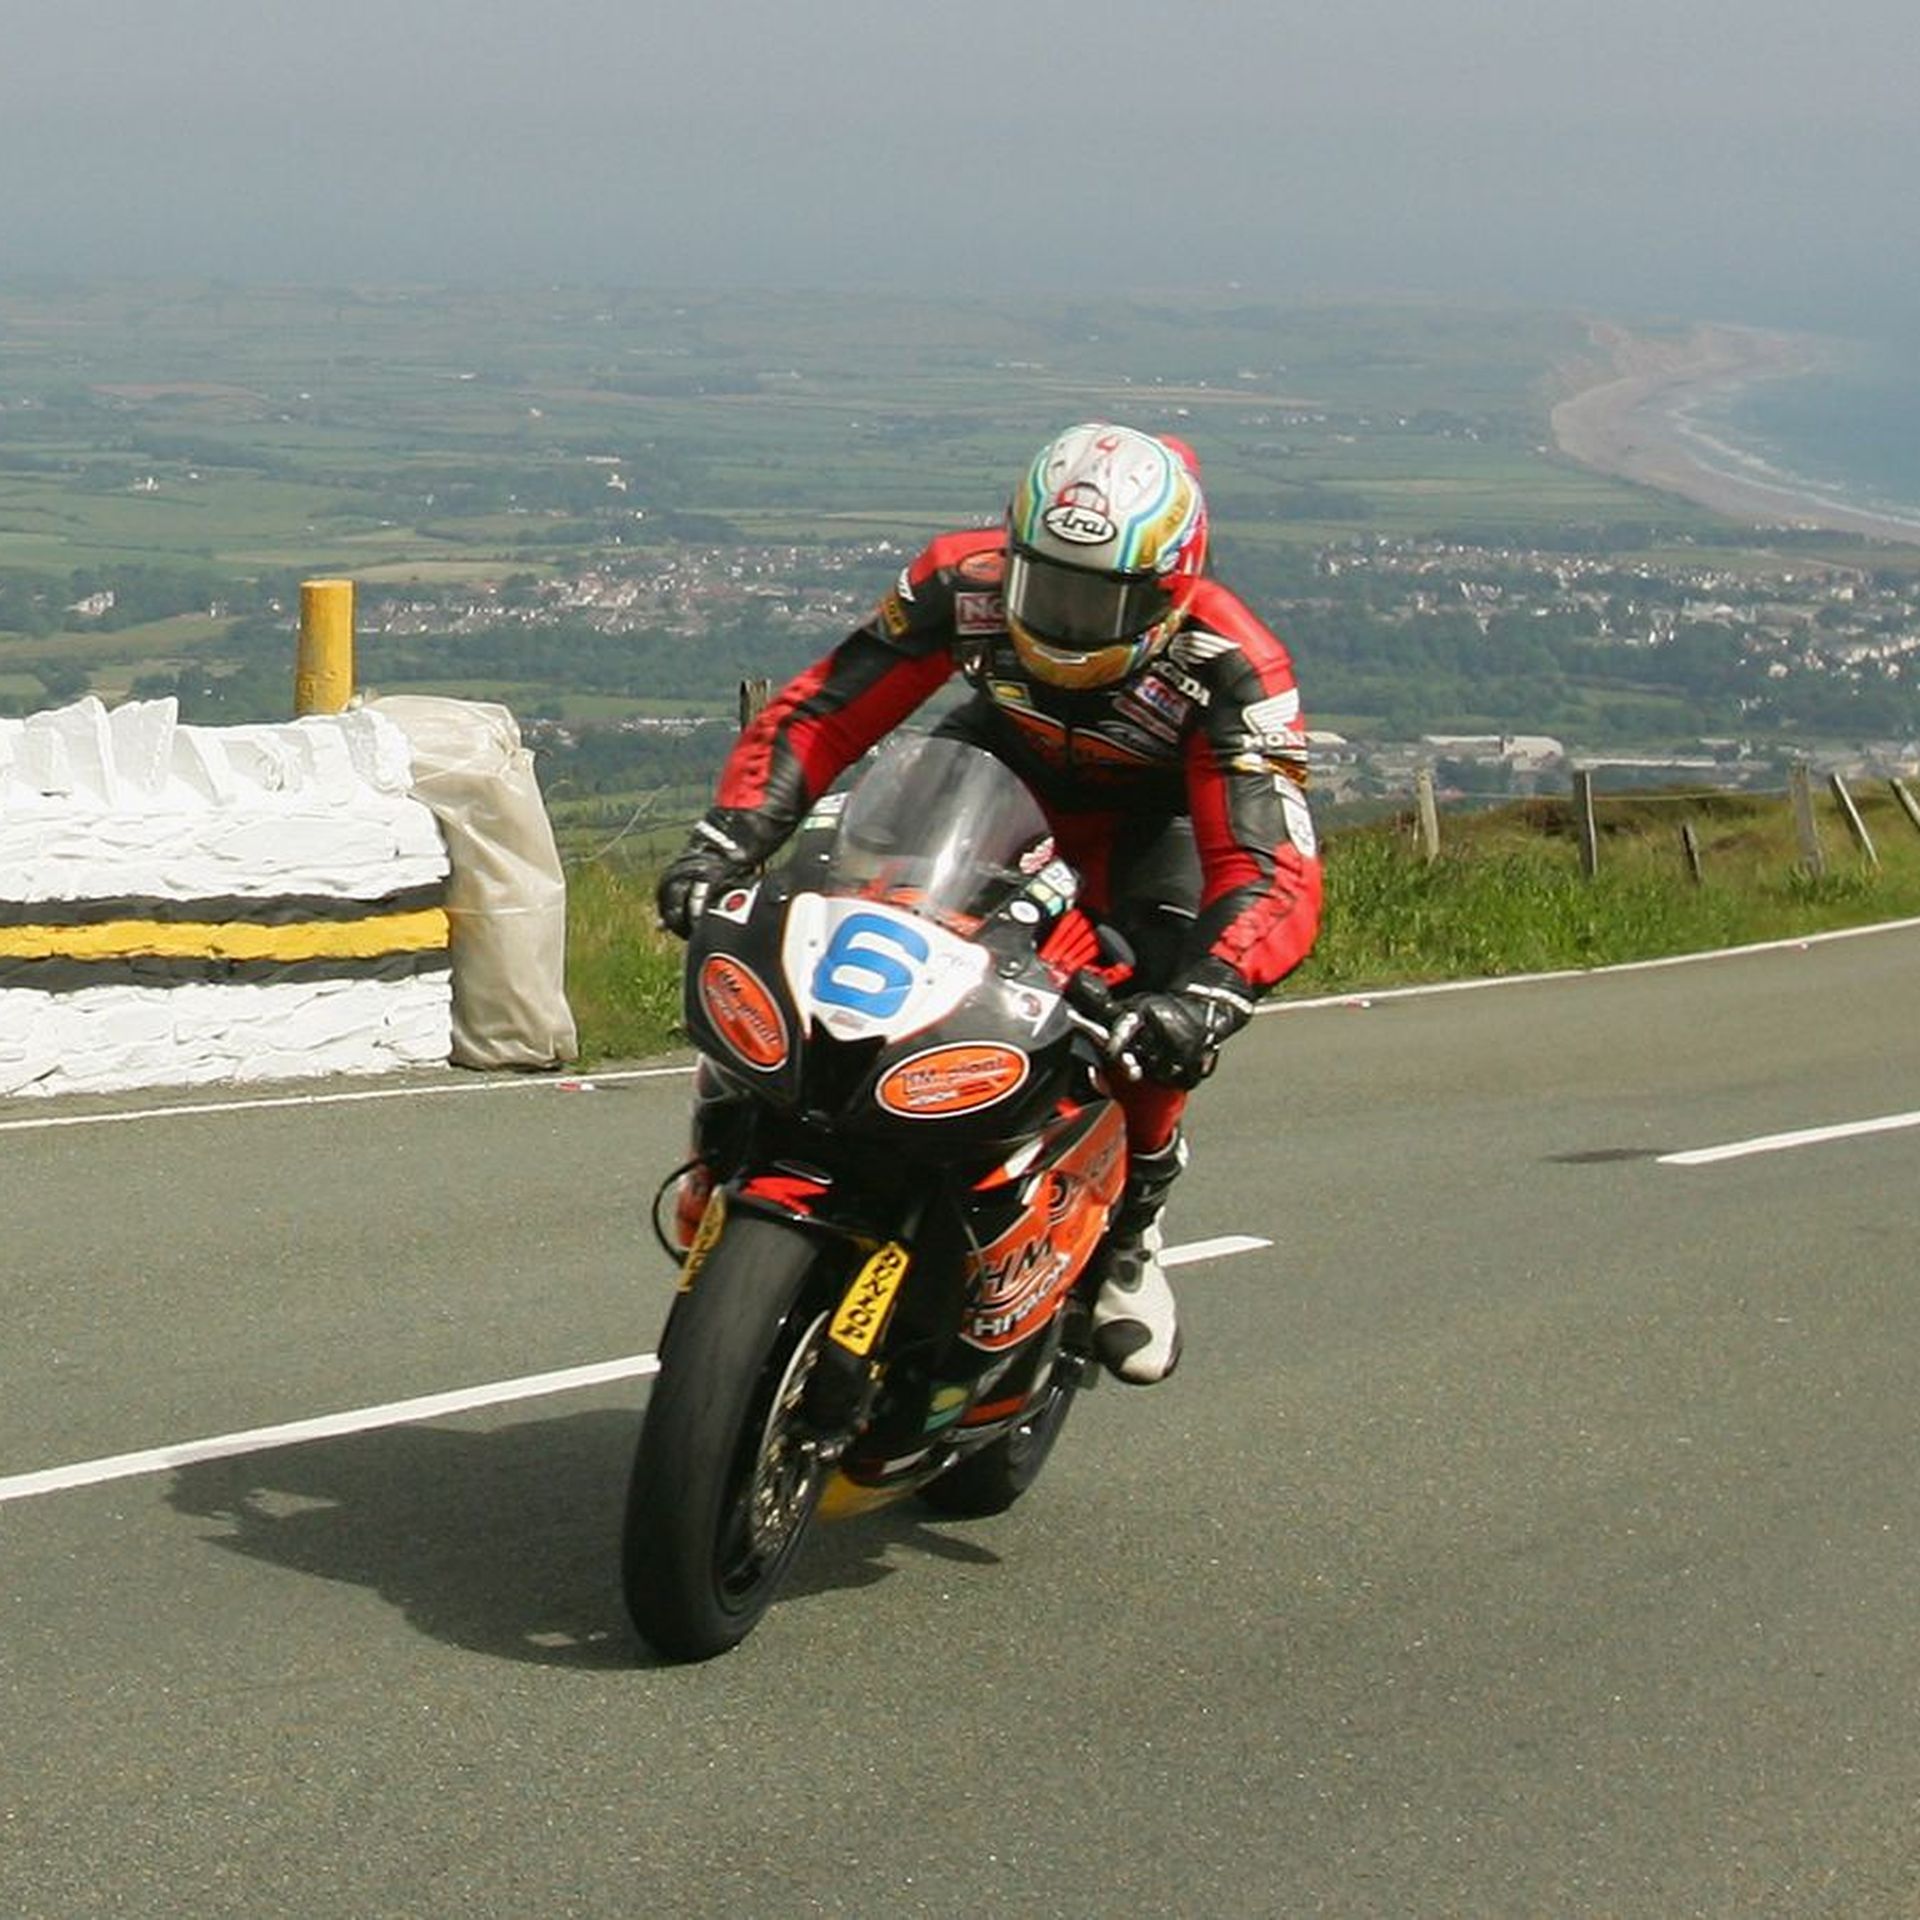 A racer on a motorcycle in the 2007 Isle of Man TT.